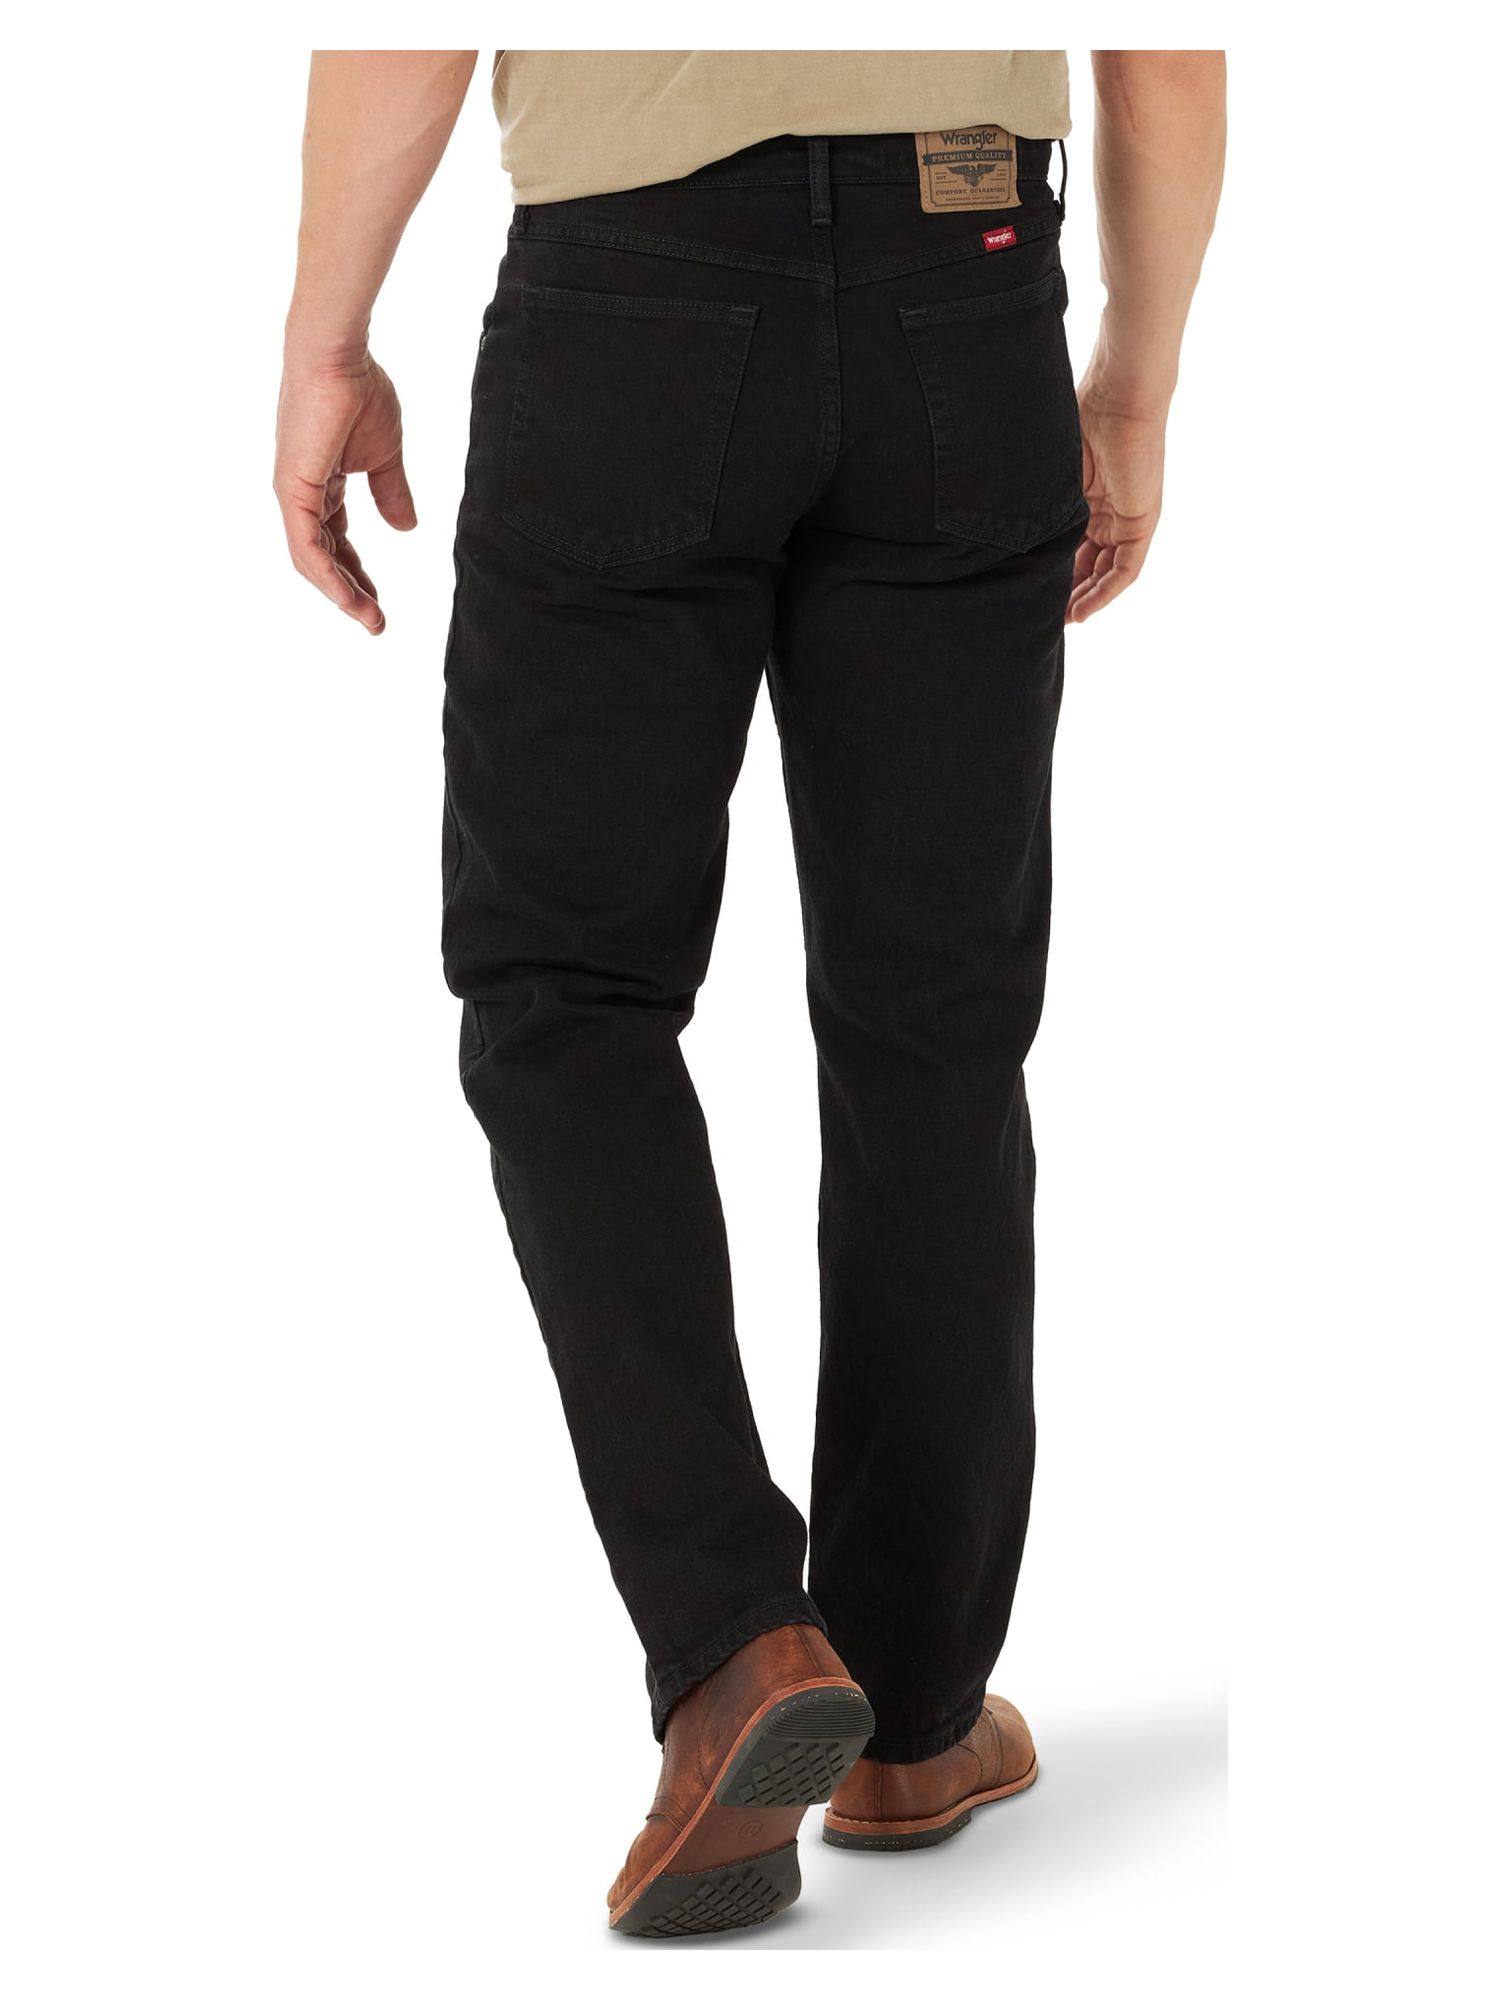 Wrangler Men's and Big Men's Relaxed Fit Jeans with Flex - image 4 of 7